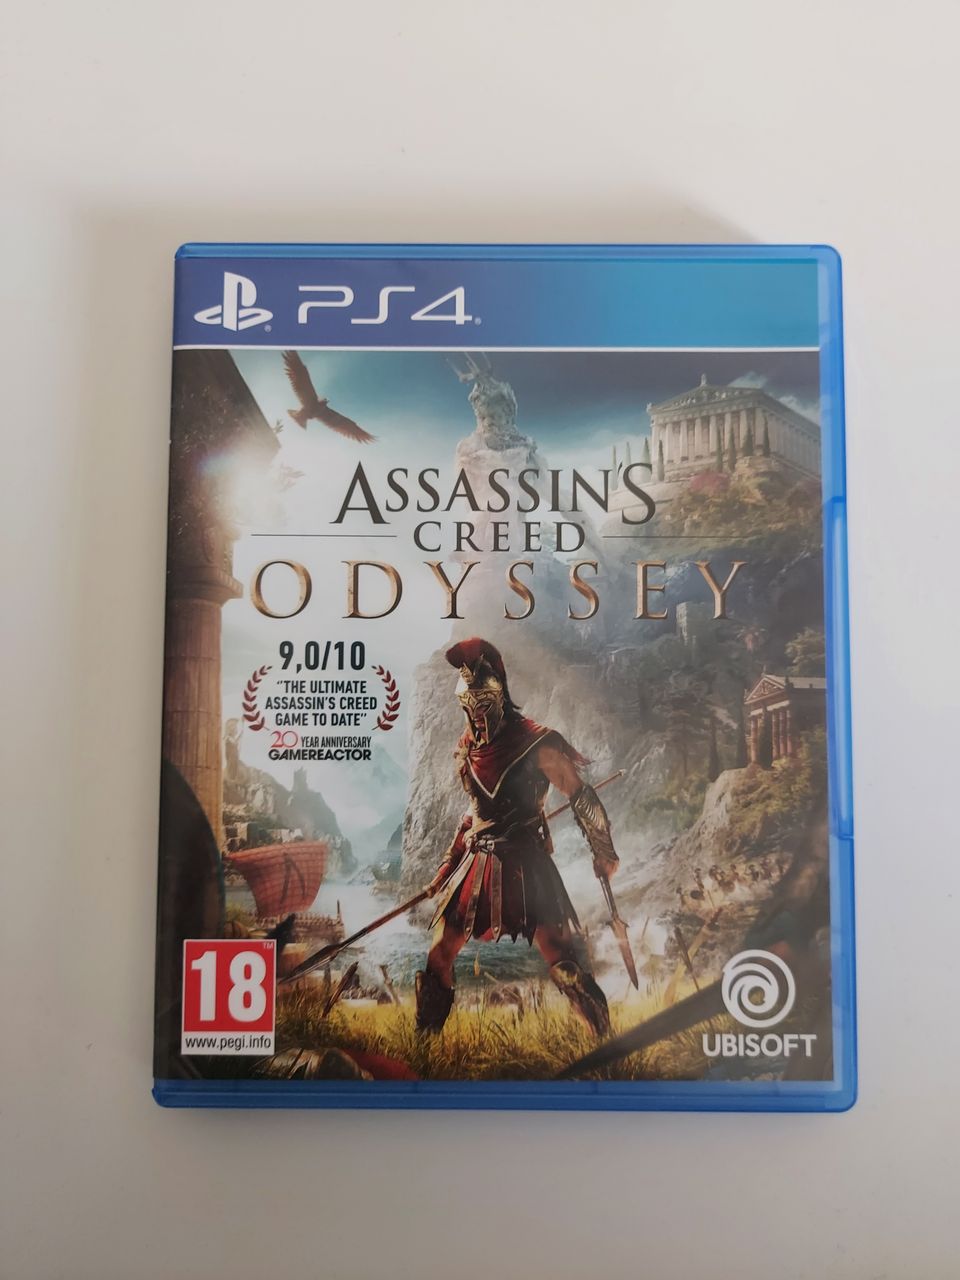 Assassin's Creed: Odyssey (PS4)